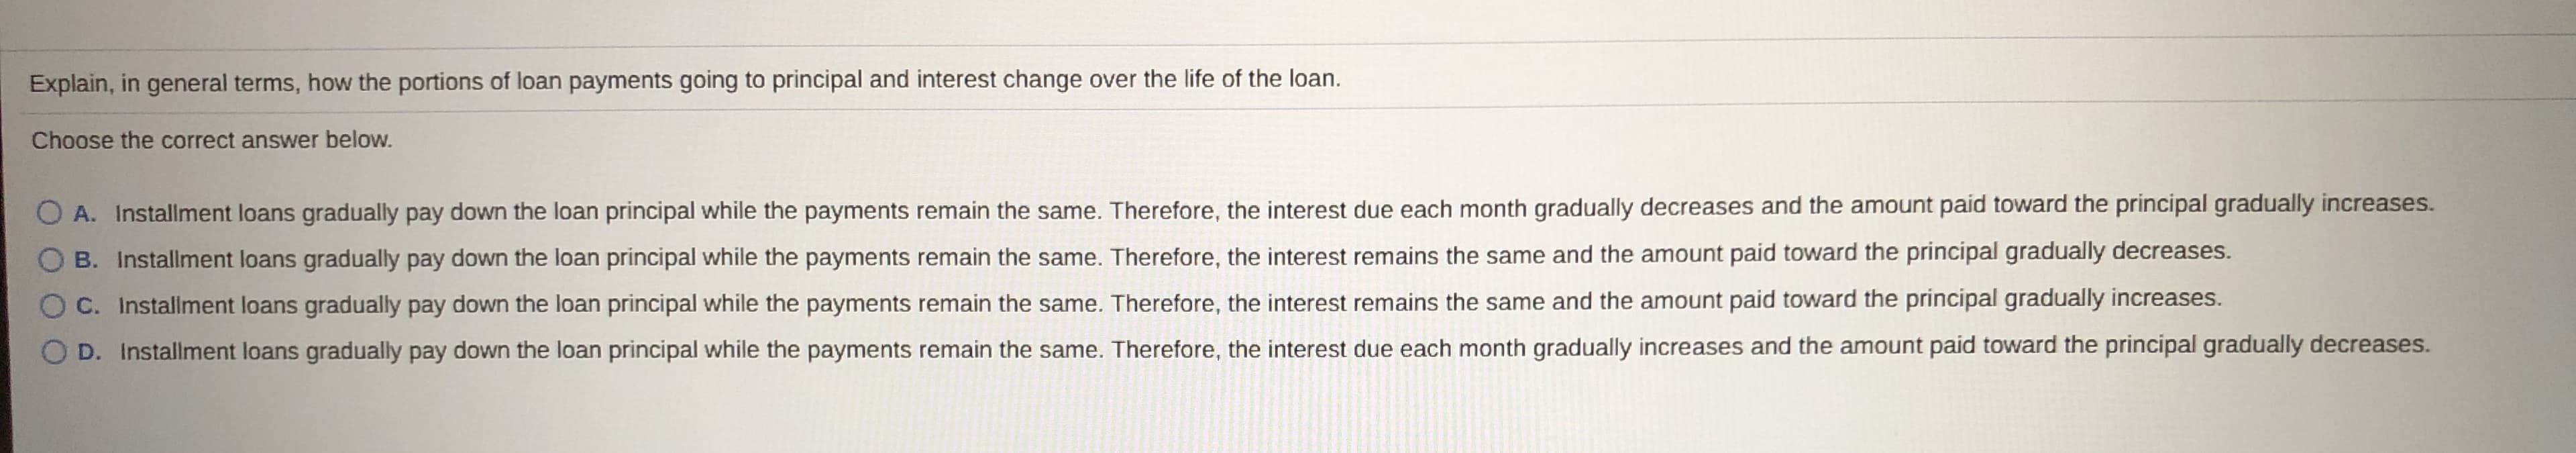 Explain, in general terms, how the portions of loan payments going to principal and interest change over the life of the loan.
Choose the correct answer below.
O A. Installment loans gradually pay down the loan principal while the payments remain the same. Therefore, the interest due each month gradually decreases and the amount paid toward the principal gradually increases.
O B. Installment loans gradually pay down the loan principal while the payments remain the same. Therefore, the interest remains the same and the amount paid toward the principal gradually decreases.
O C. Installment loans gradually pay down the loan principal while the payments remain the same. Therefore, the interest remains the same and the amount paid toward the principal gradually increases.
OD. Installment loans gradually pay down the loan principal while the payments remain the same. Therefore, the interest due each month gradually increases and the amount paid toward the principal gradually decreases.
